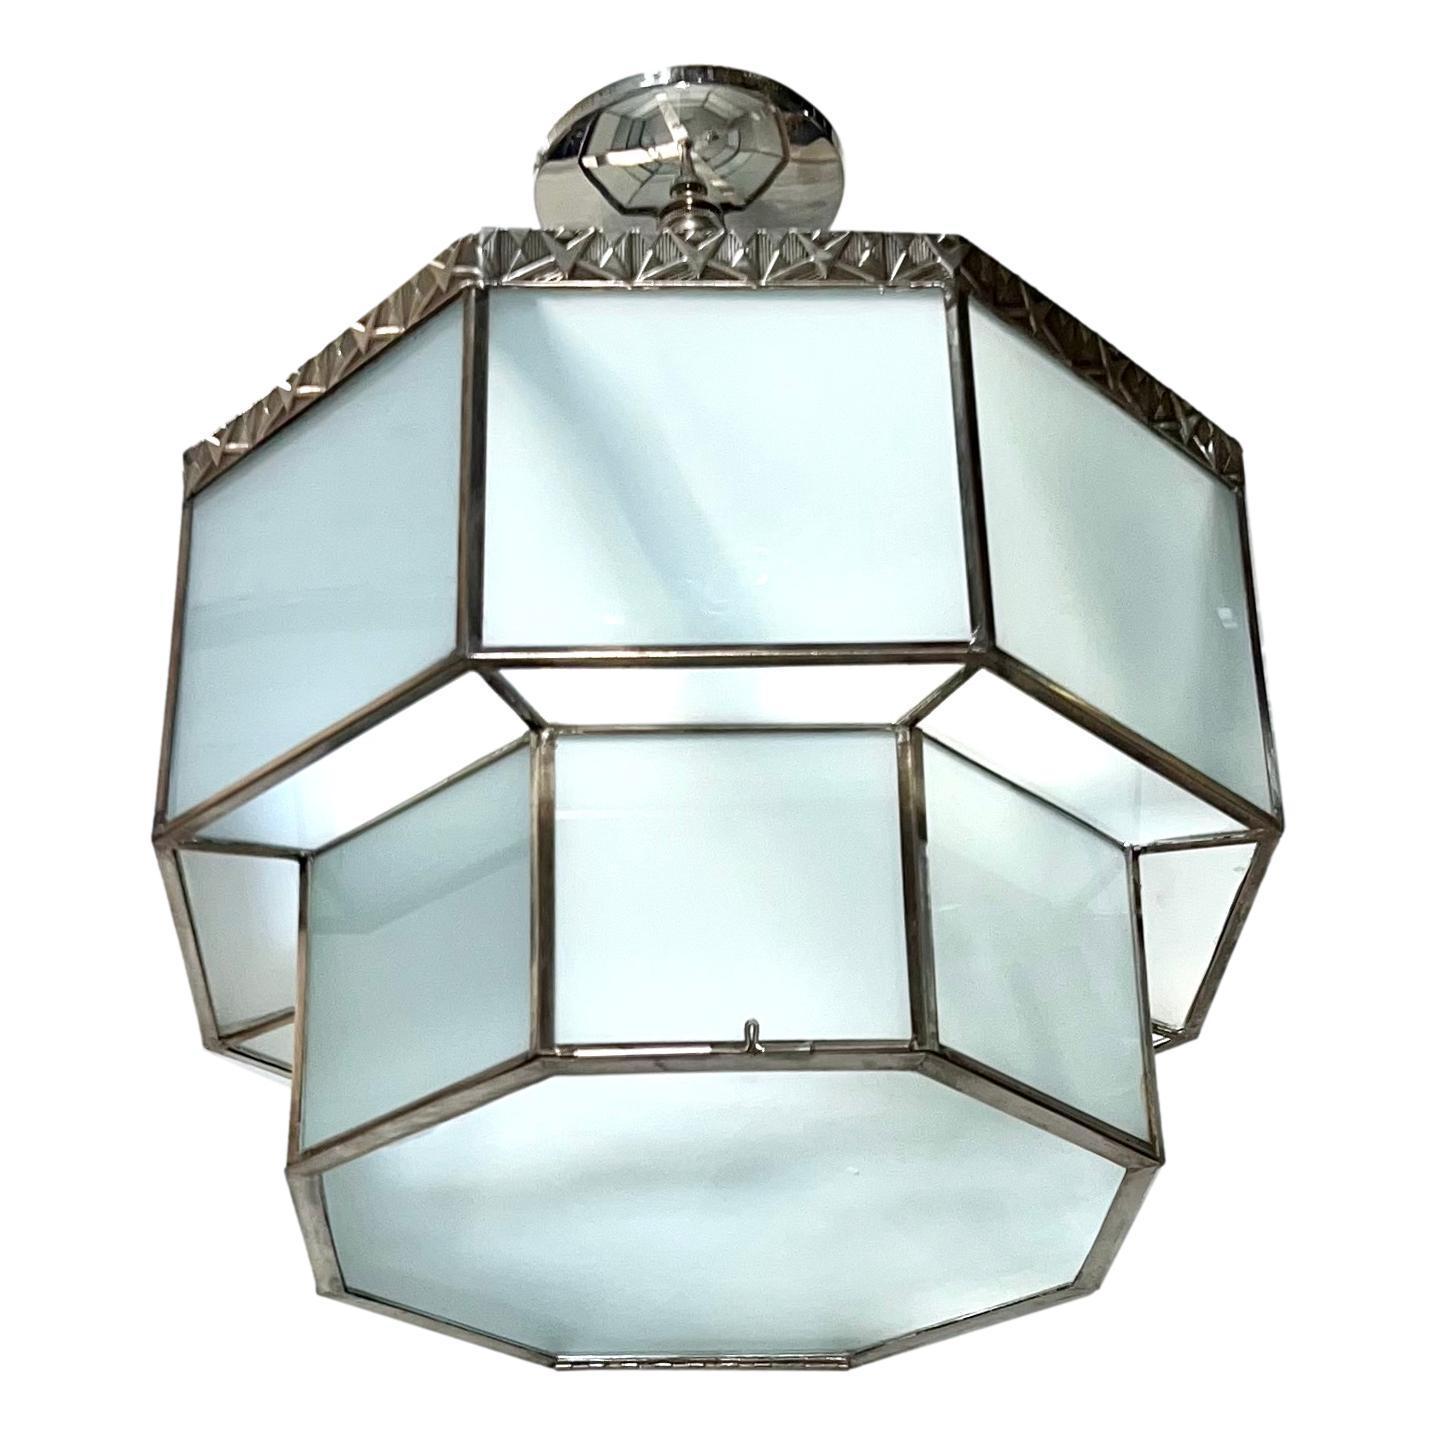 An octagonal circa 1940's French silver-plated and frosted glass light fixture with 4 interior lights.

Measurements:
Drop: 19